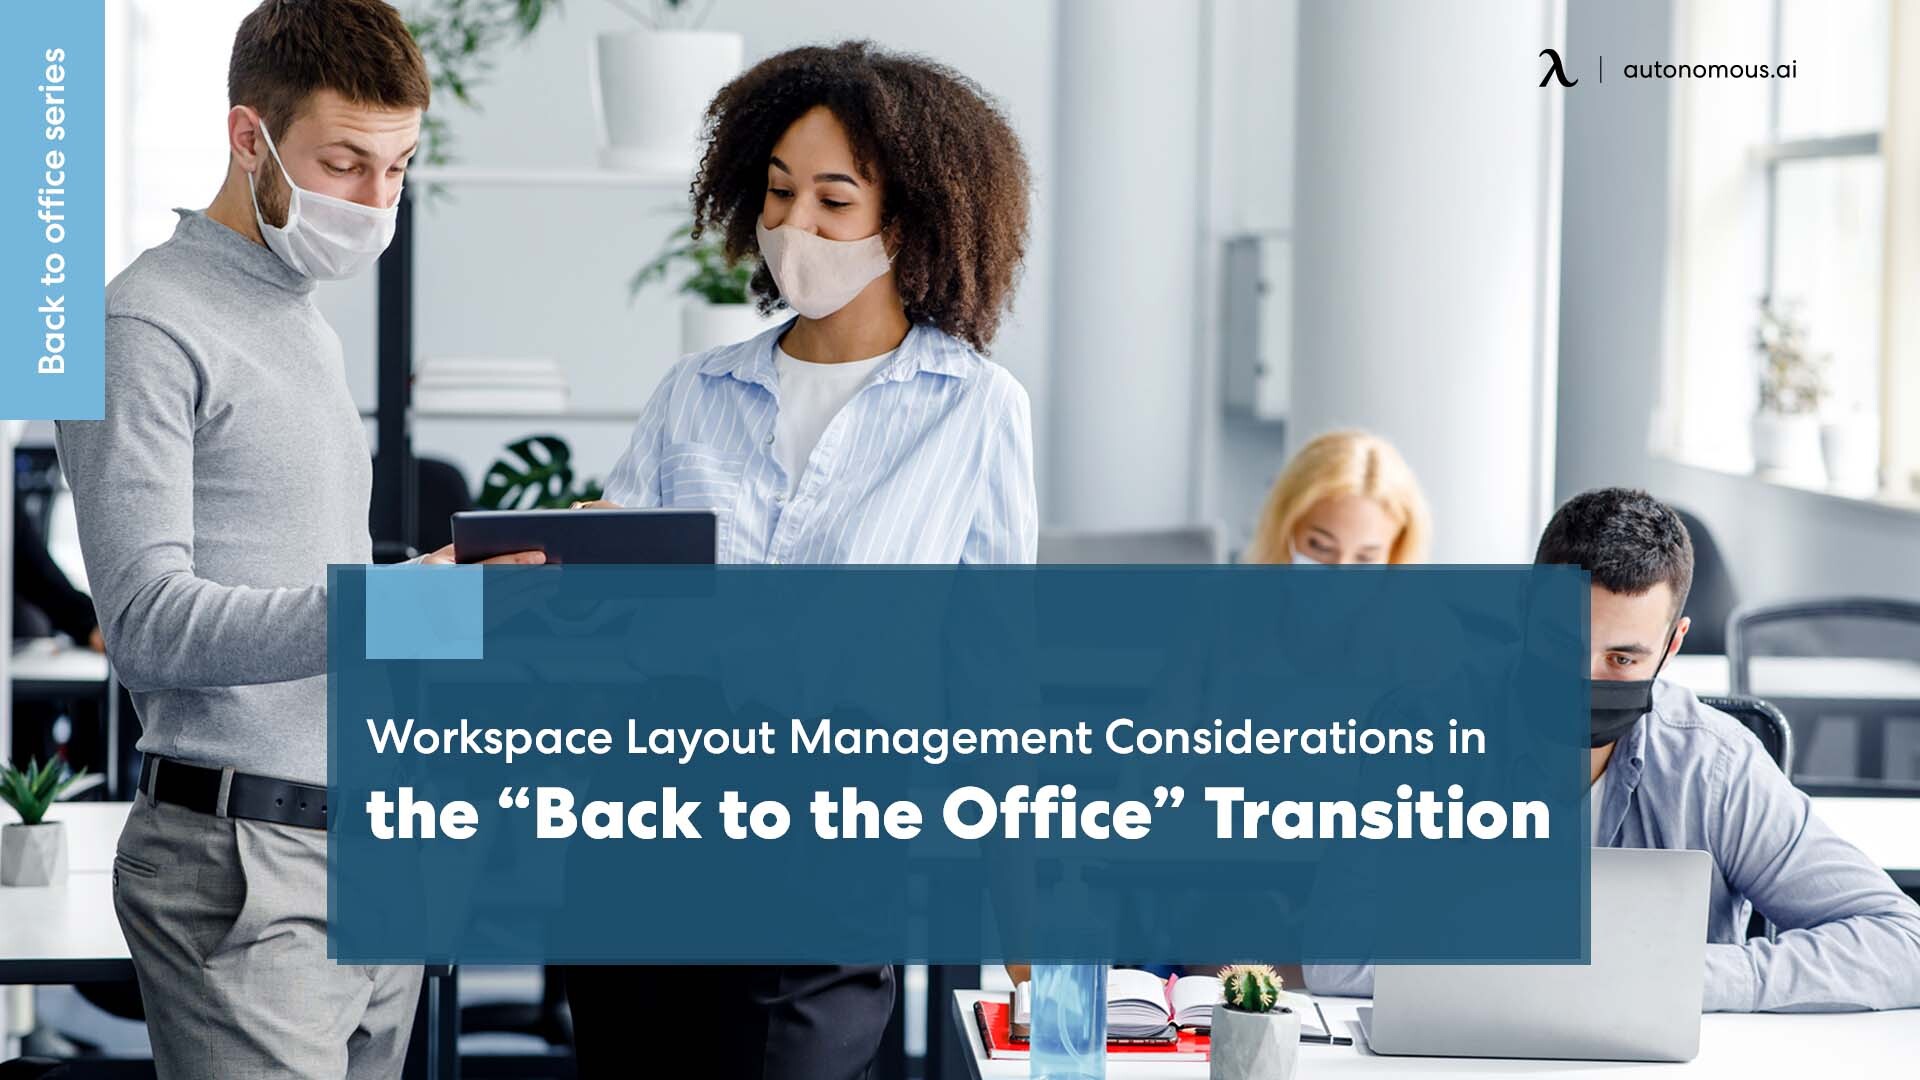 Workspace Layout Management Considerations in the “Back to the Office” Transition